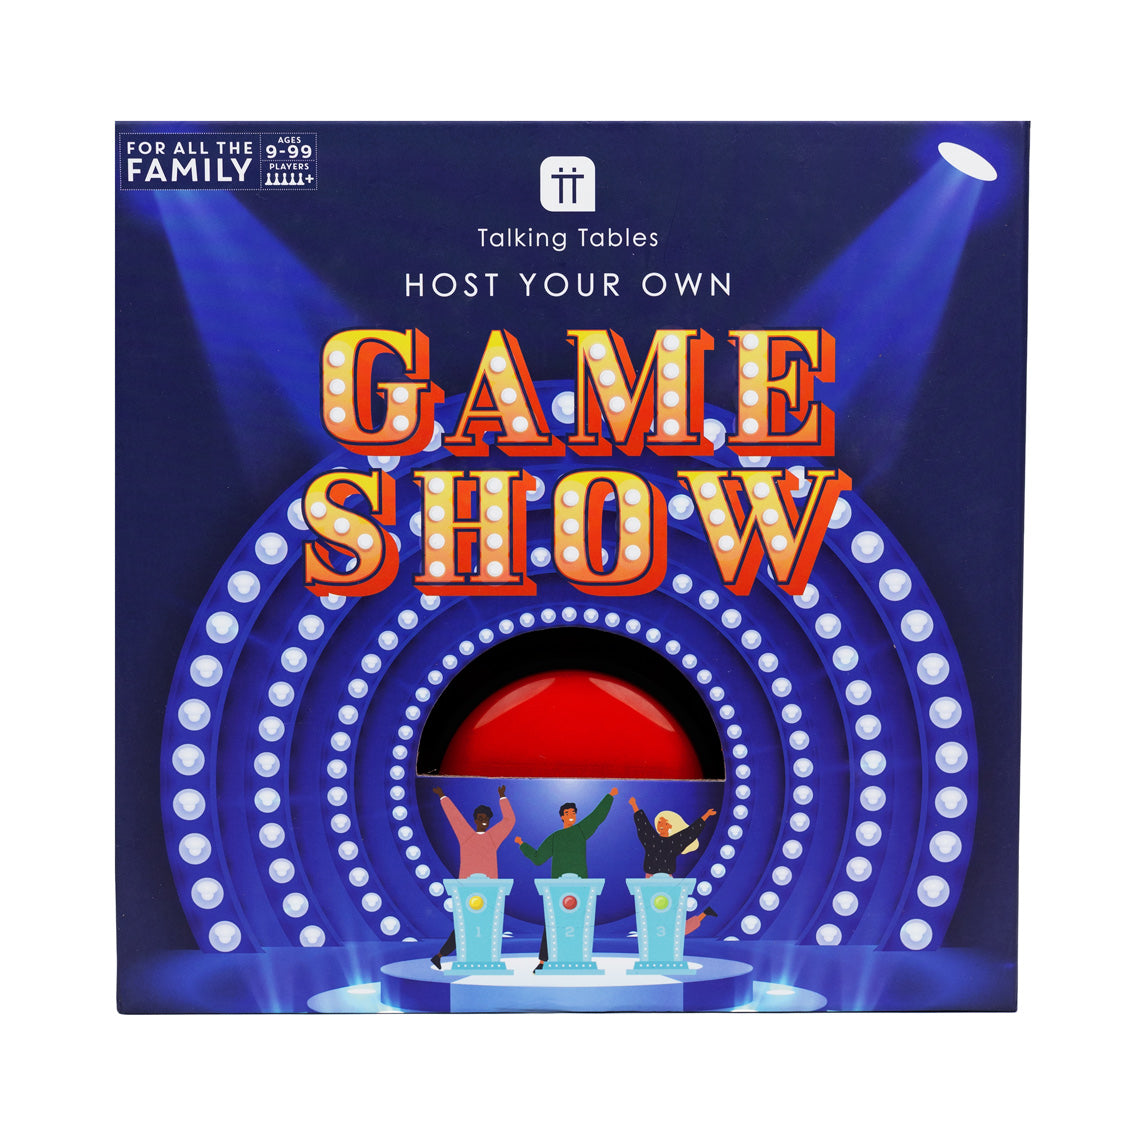 Host Your Own Game - Family Gameshow